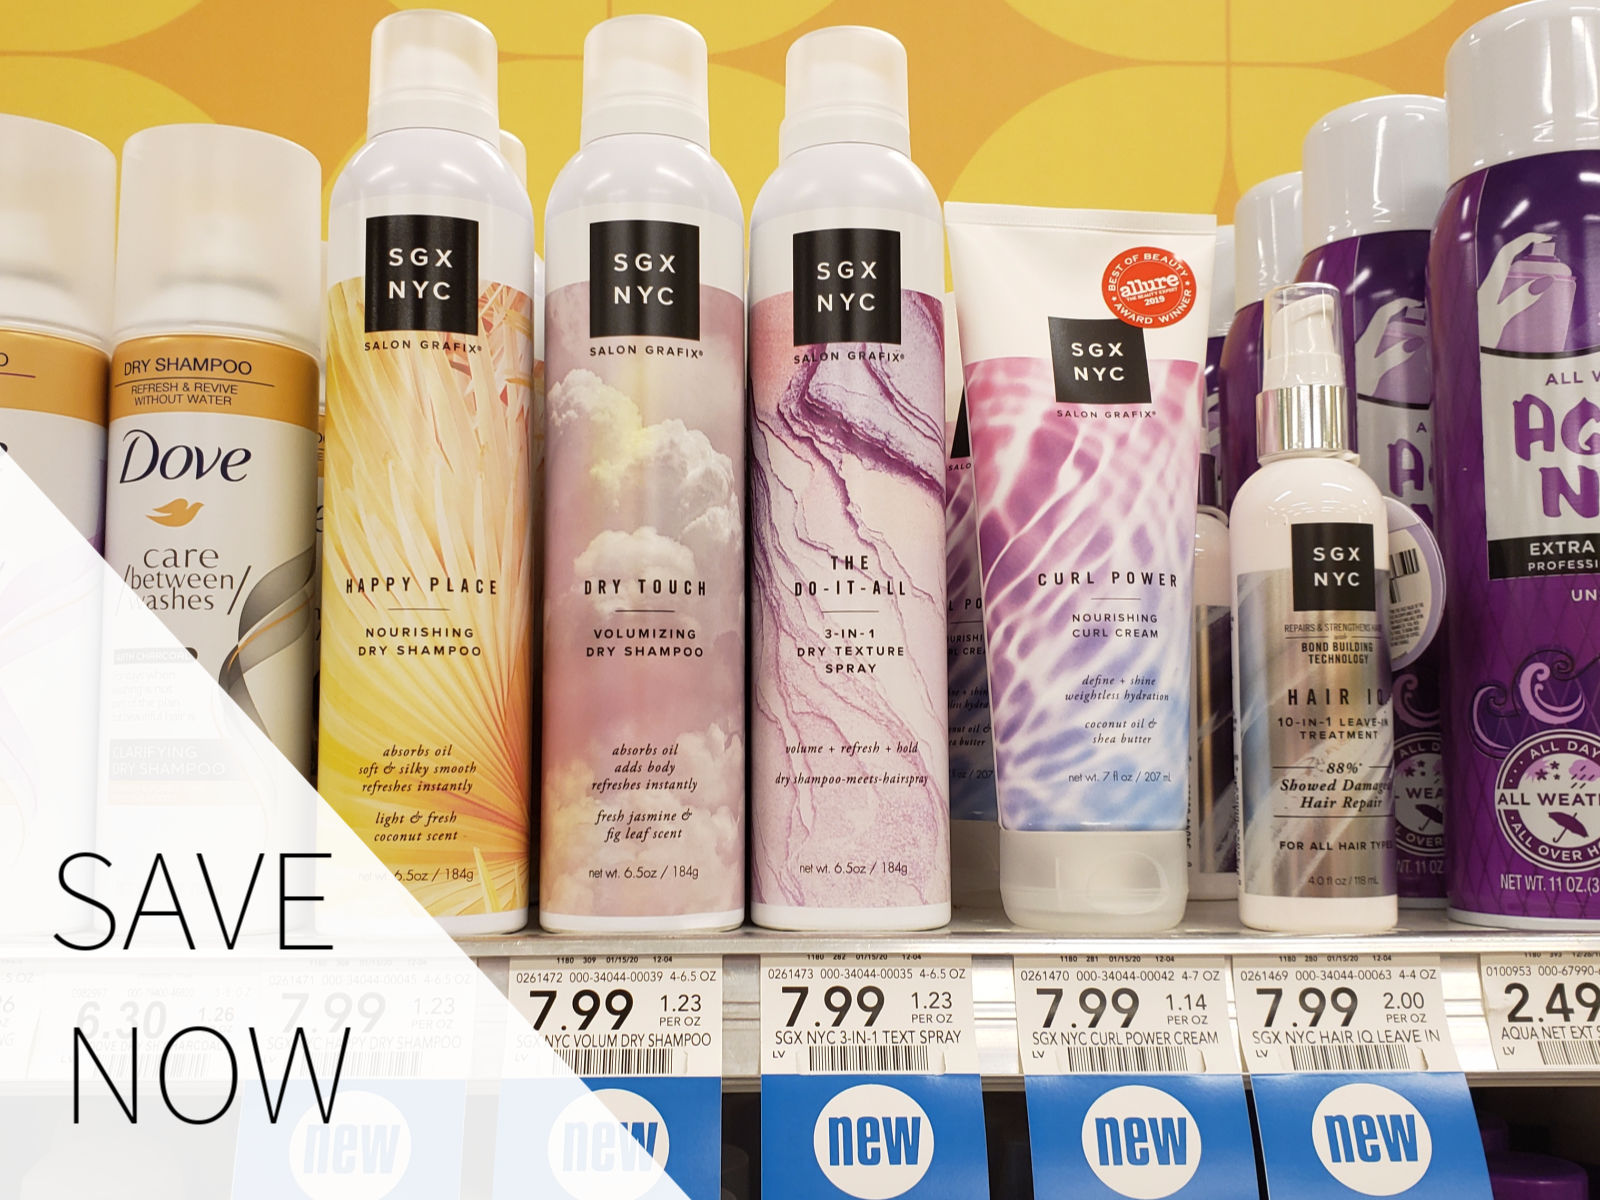 SGX NYC Haircare Is Now Available At Publix - Save When You Shop! on I Heart Publix